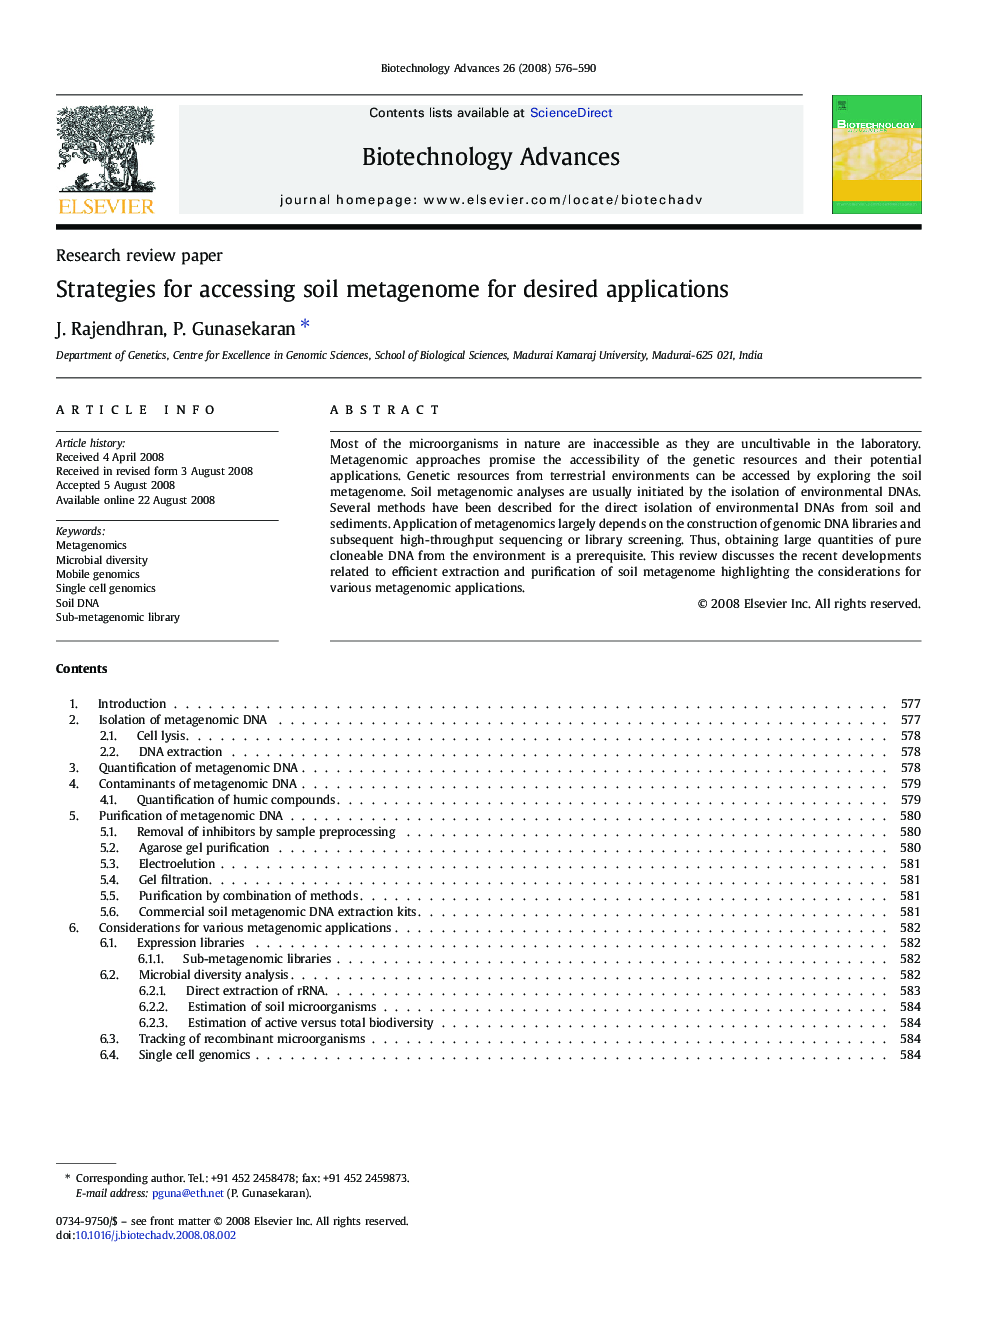 Strategies for accessing soil metagenome for desired applications